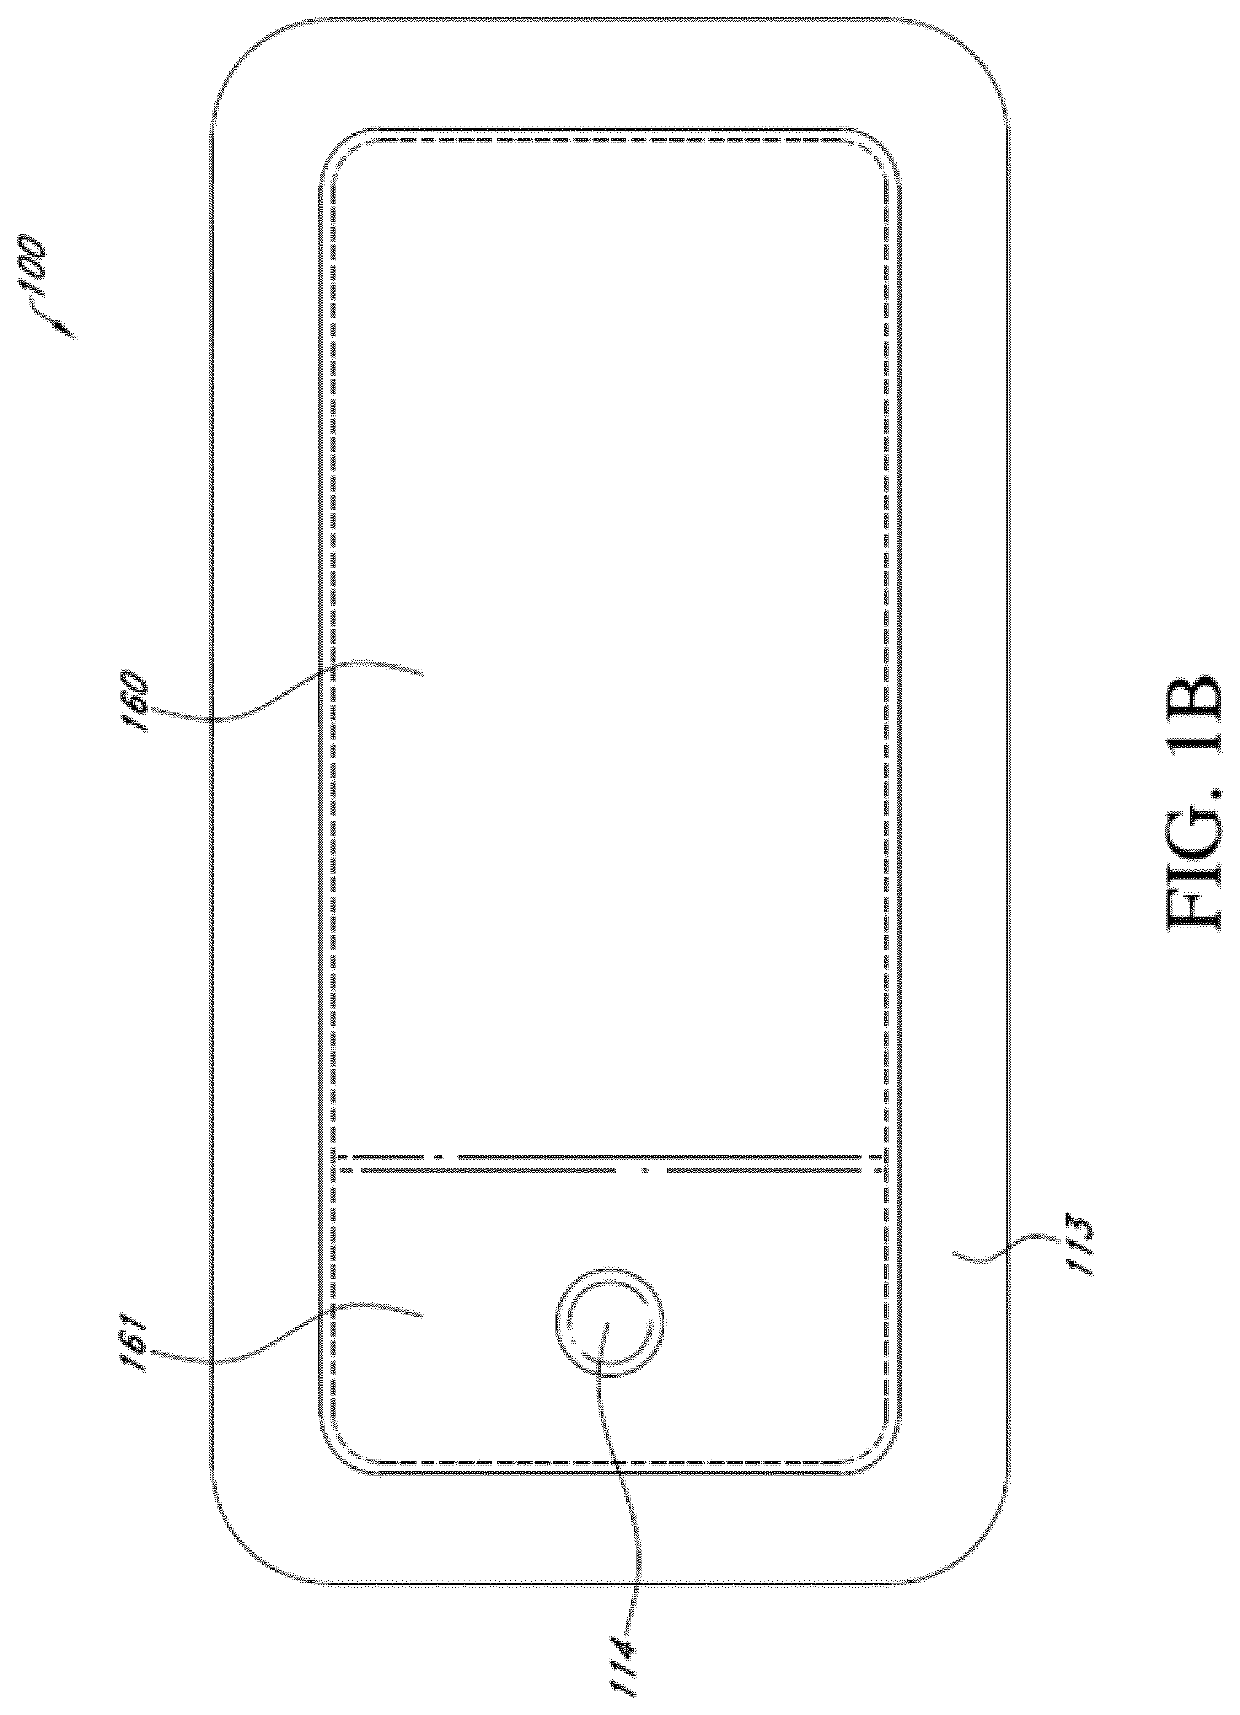 Safe operation of integrated negative pressure wound treatment apparatuses